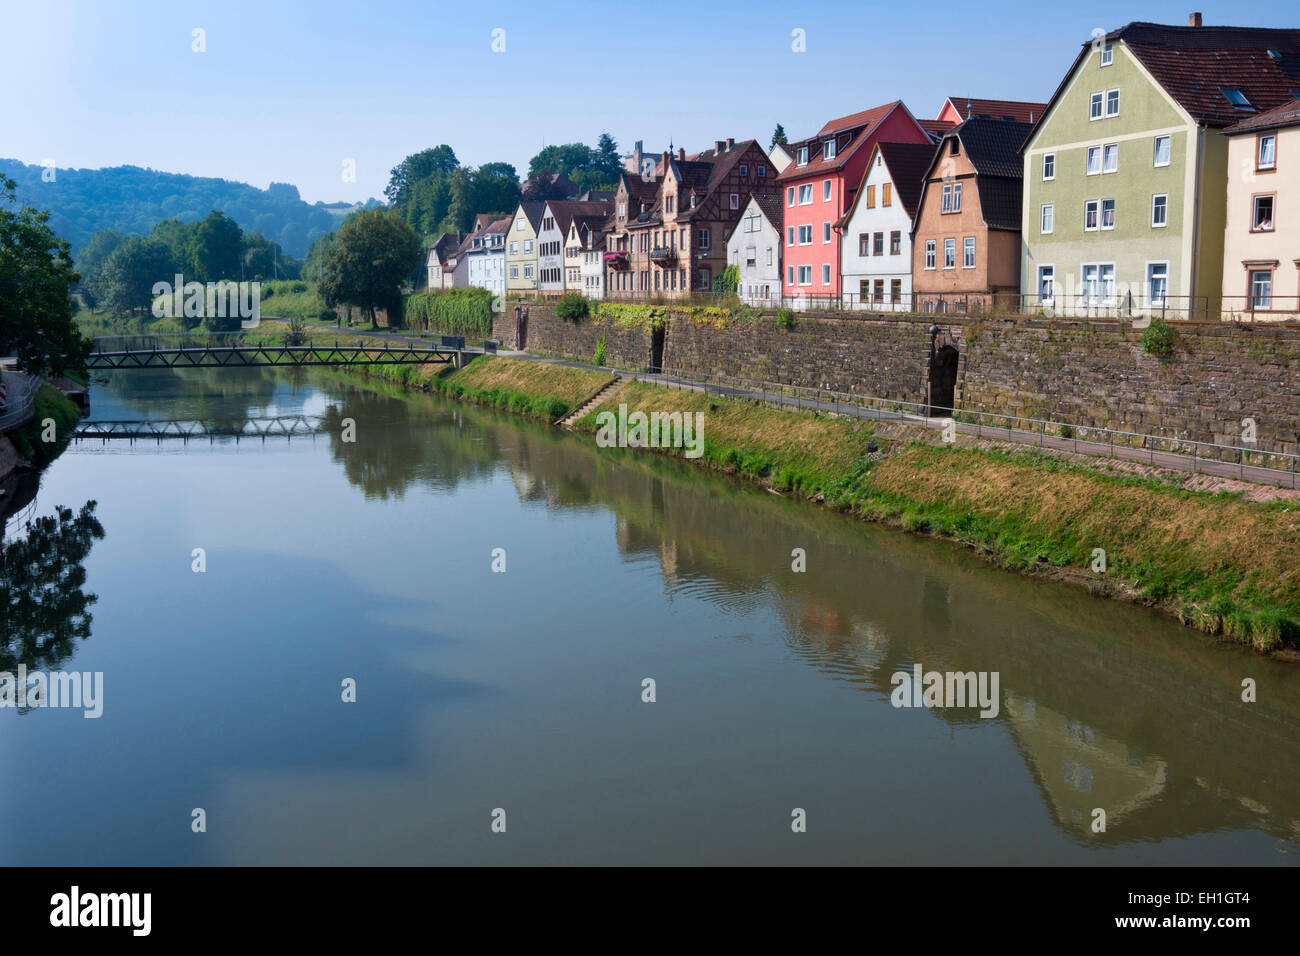 row of houses along the tauber river, wertheim city, baden-wuerttemberg, germany, europe Stock Photo